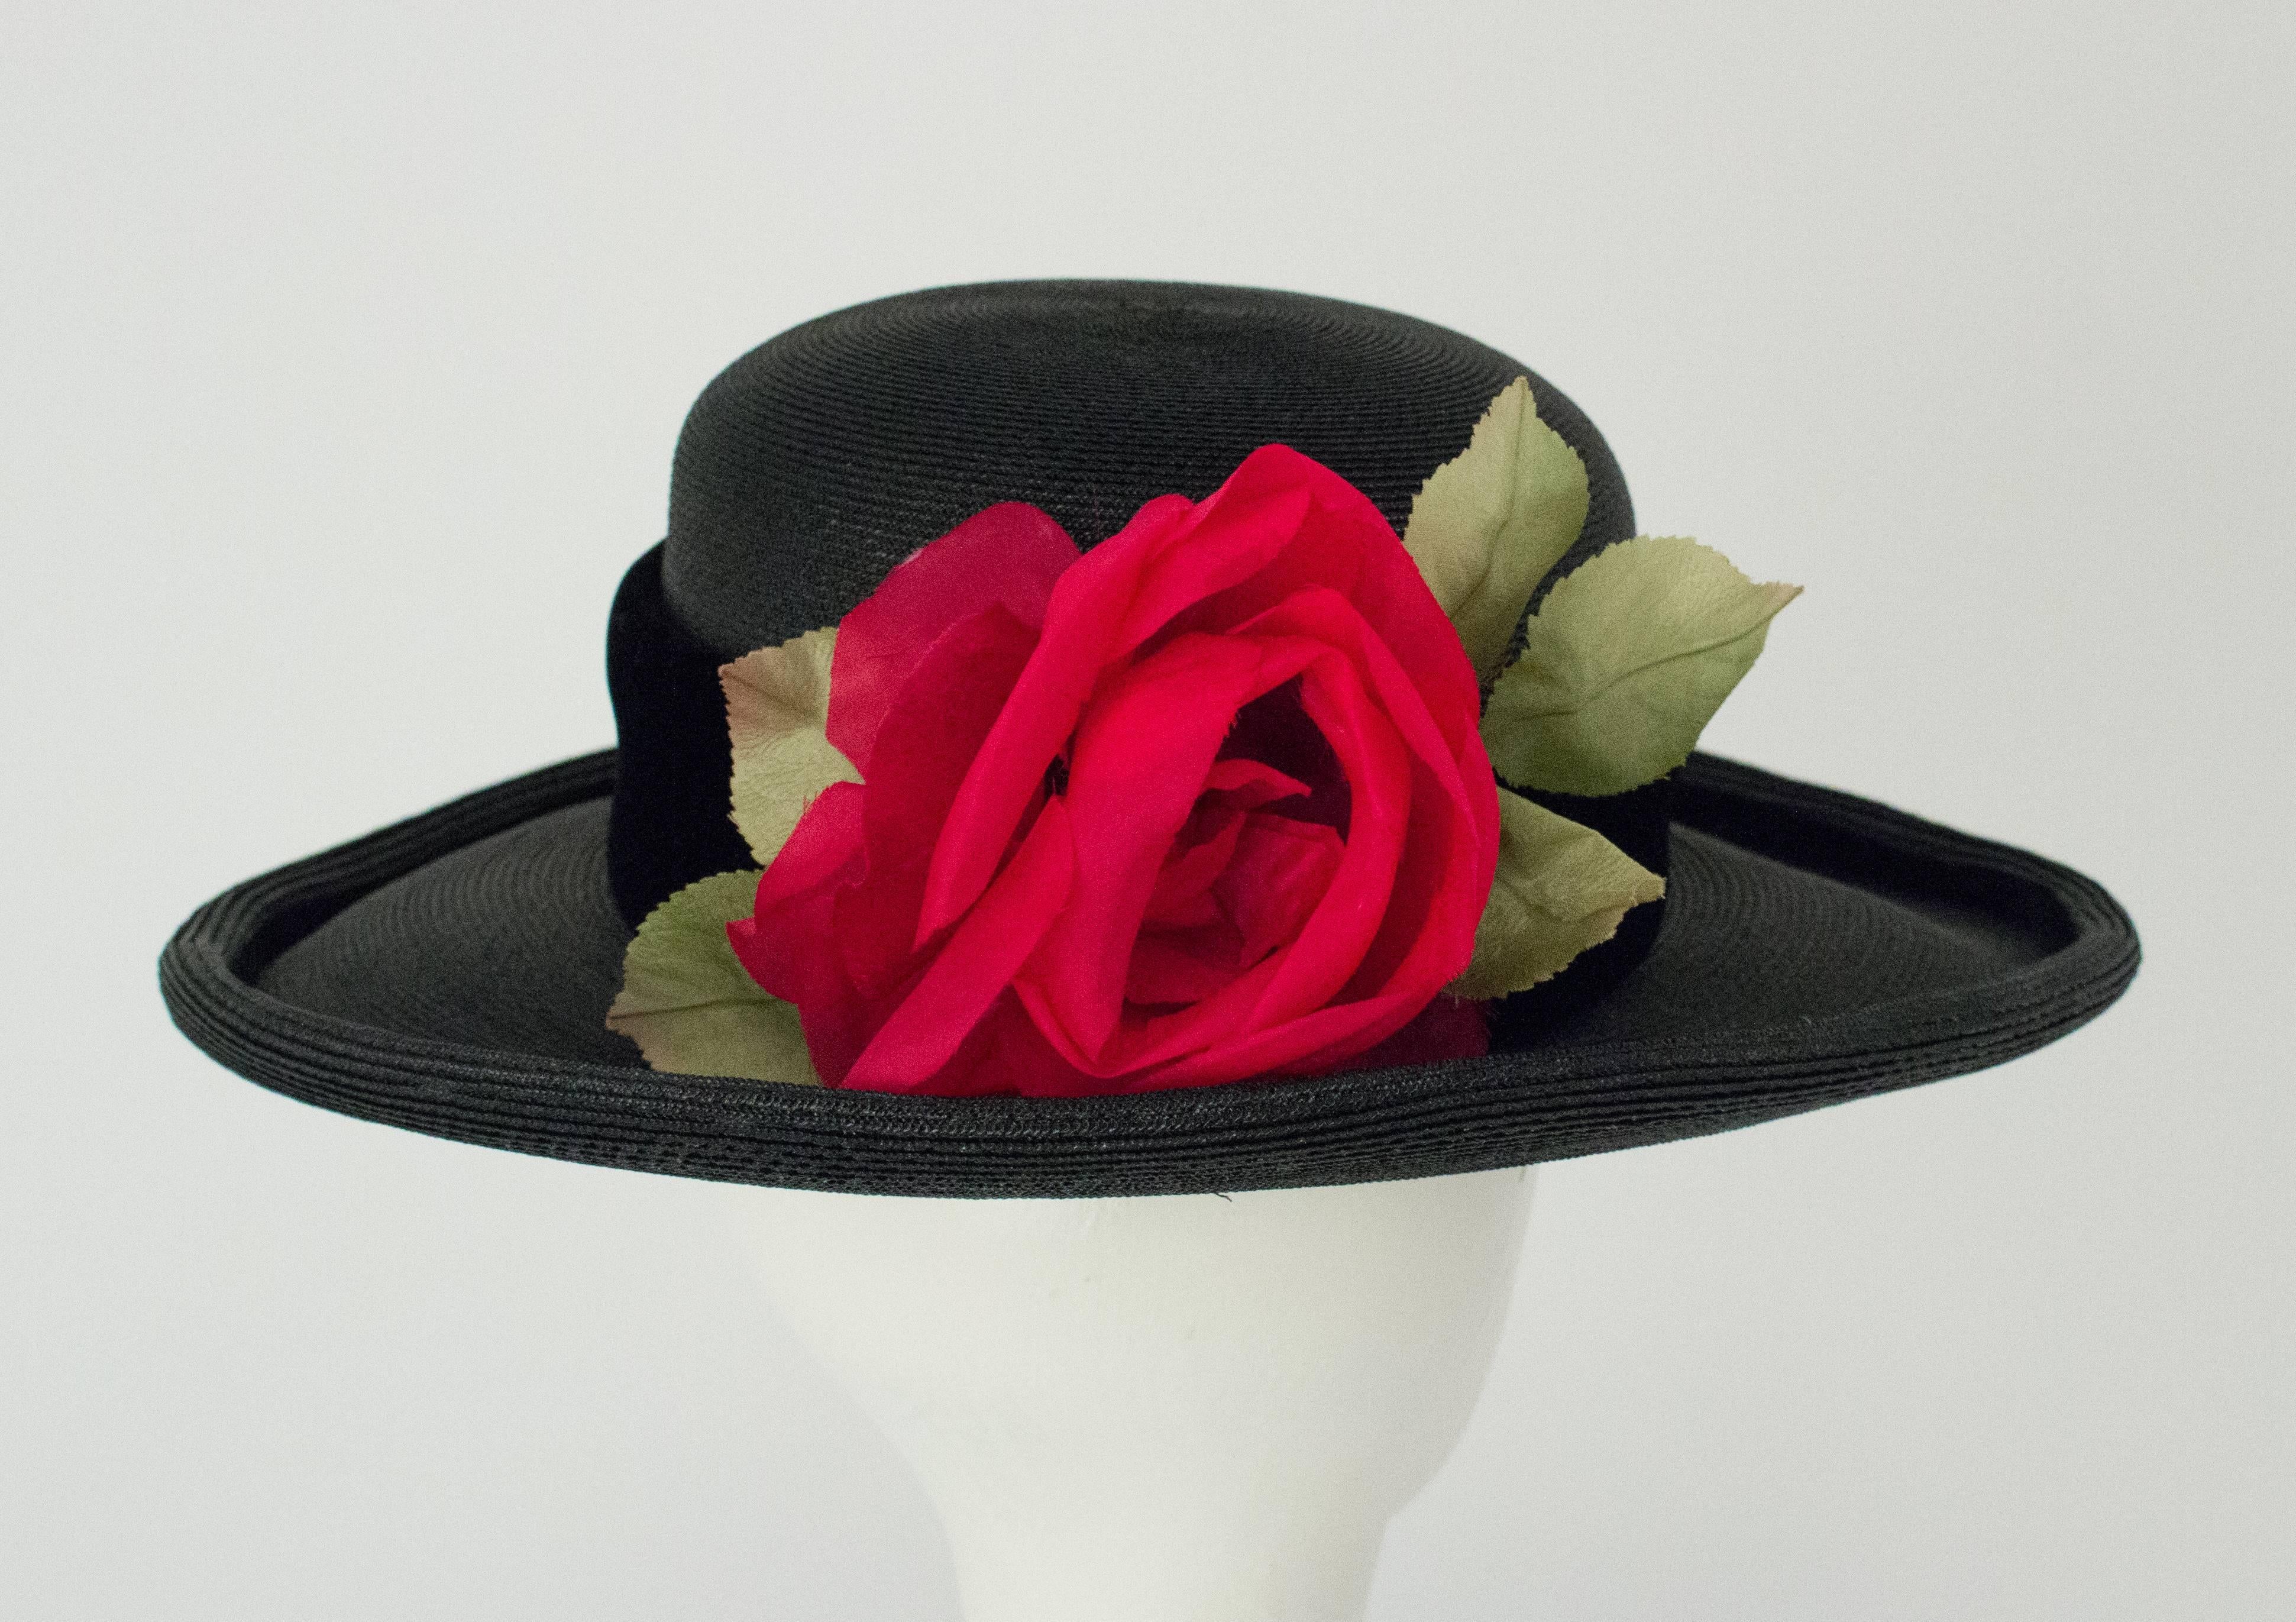 Women's 80s Christian Dior Black Straw Wide Brim Hat with Velvet Trim and Red Rose